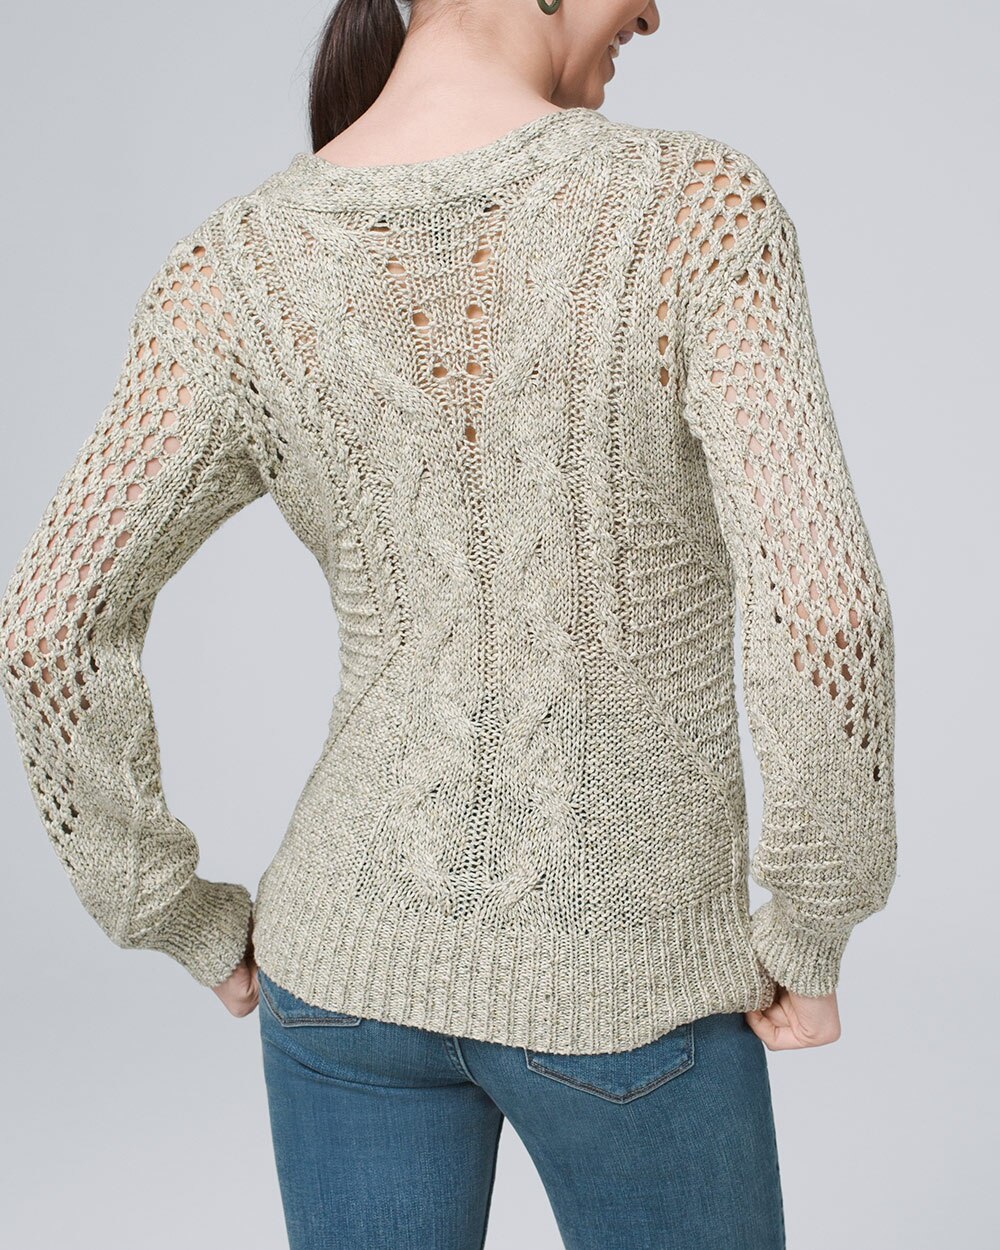 Stitchy Marled Pullover Sweater - White House Black Market